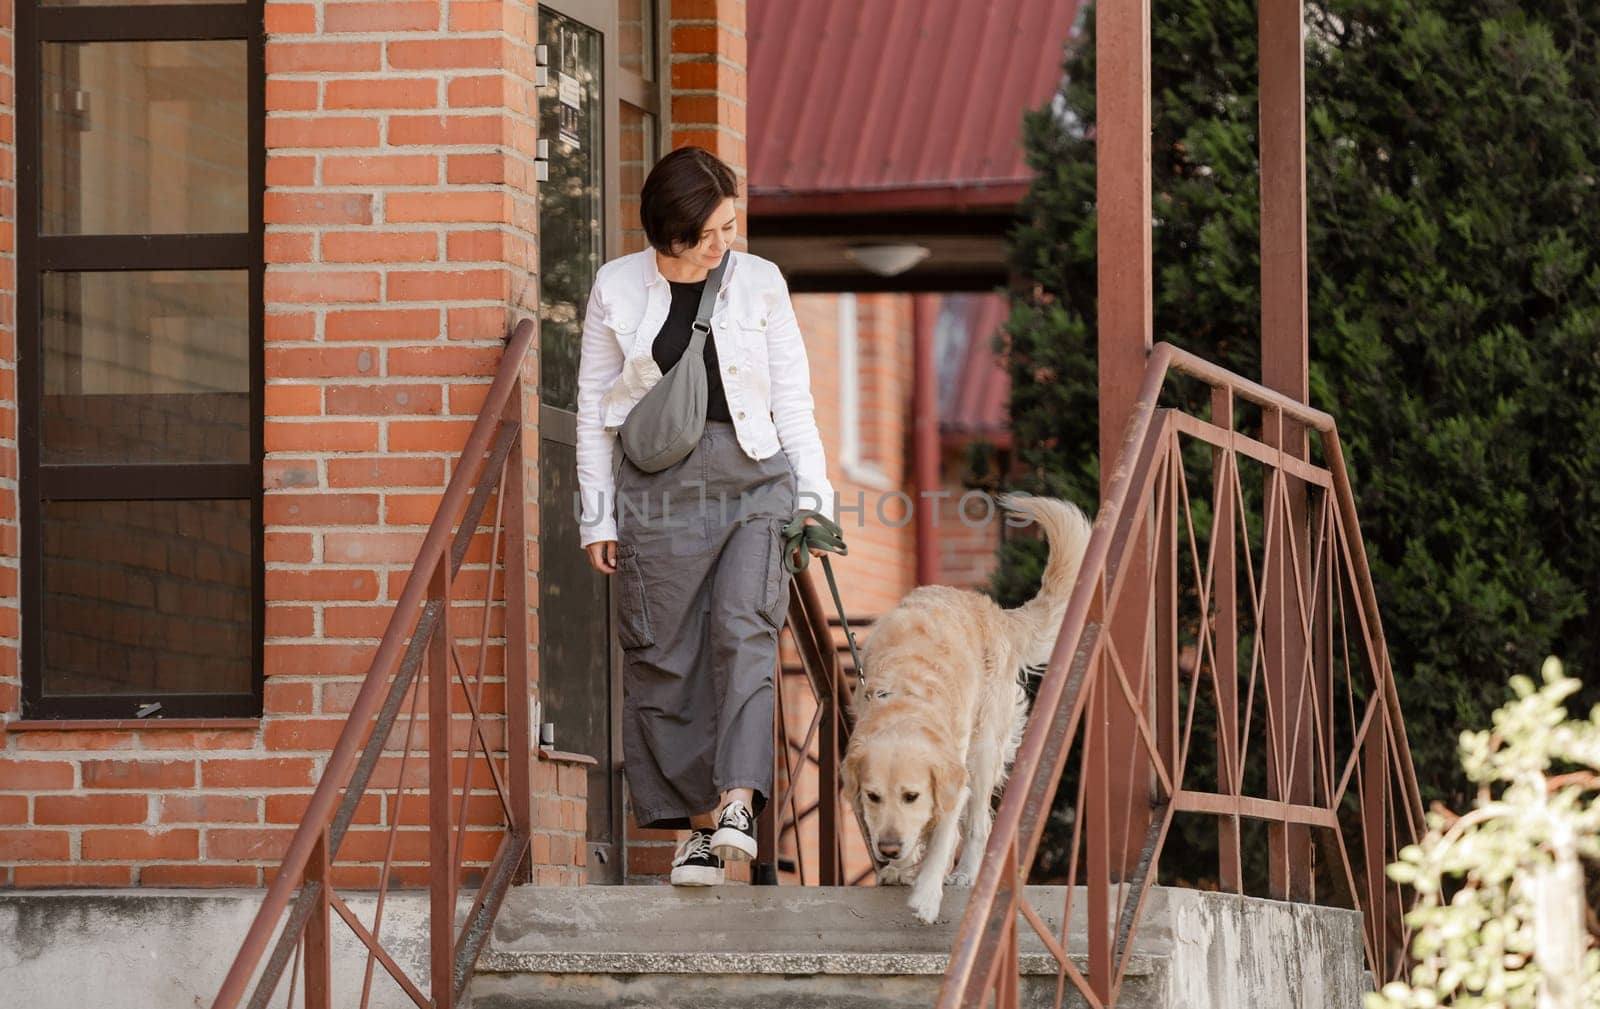 Young Woman Leaves House For Walk With Golden Retriever by tan4ikk1